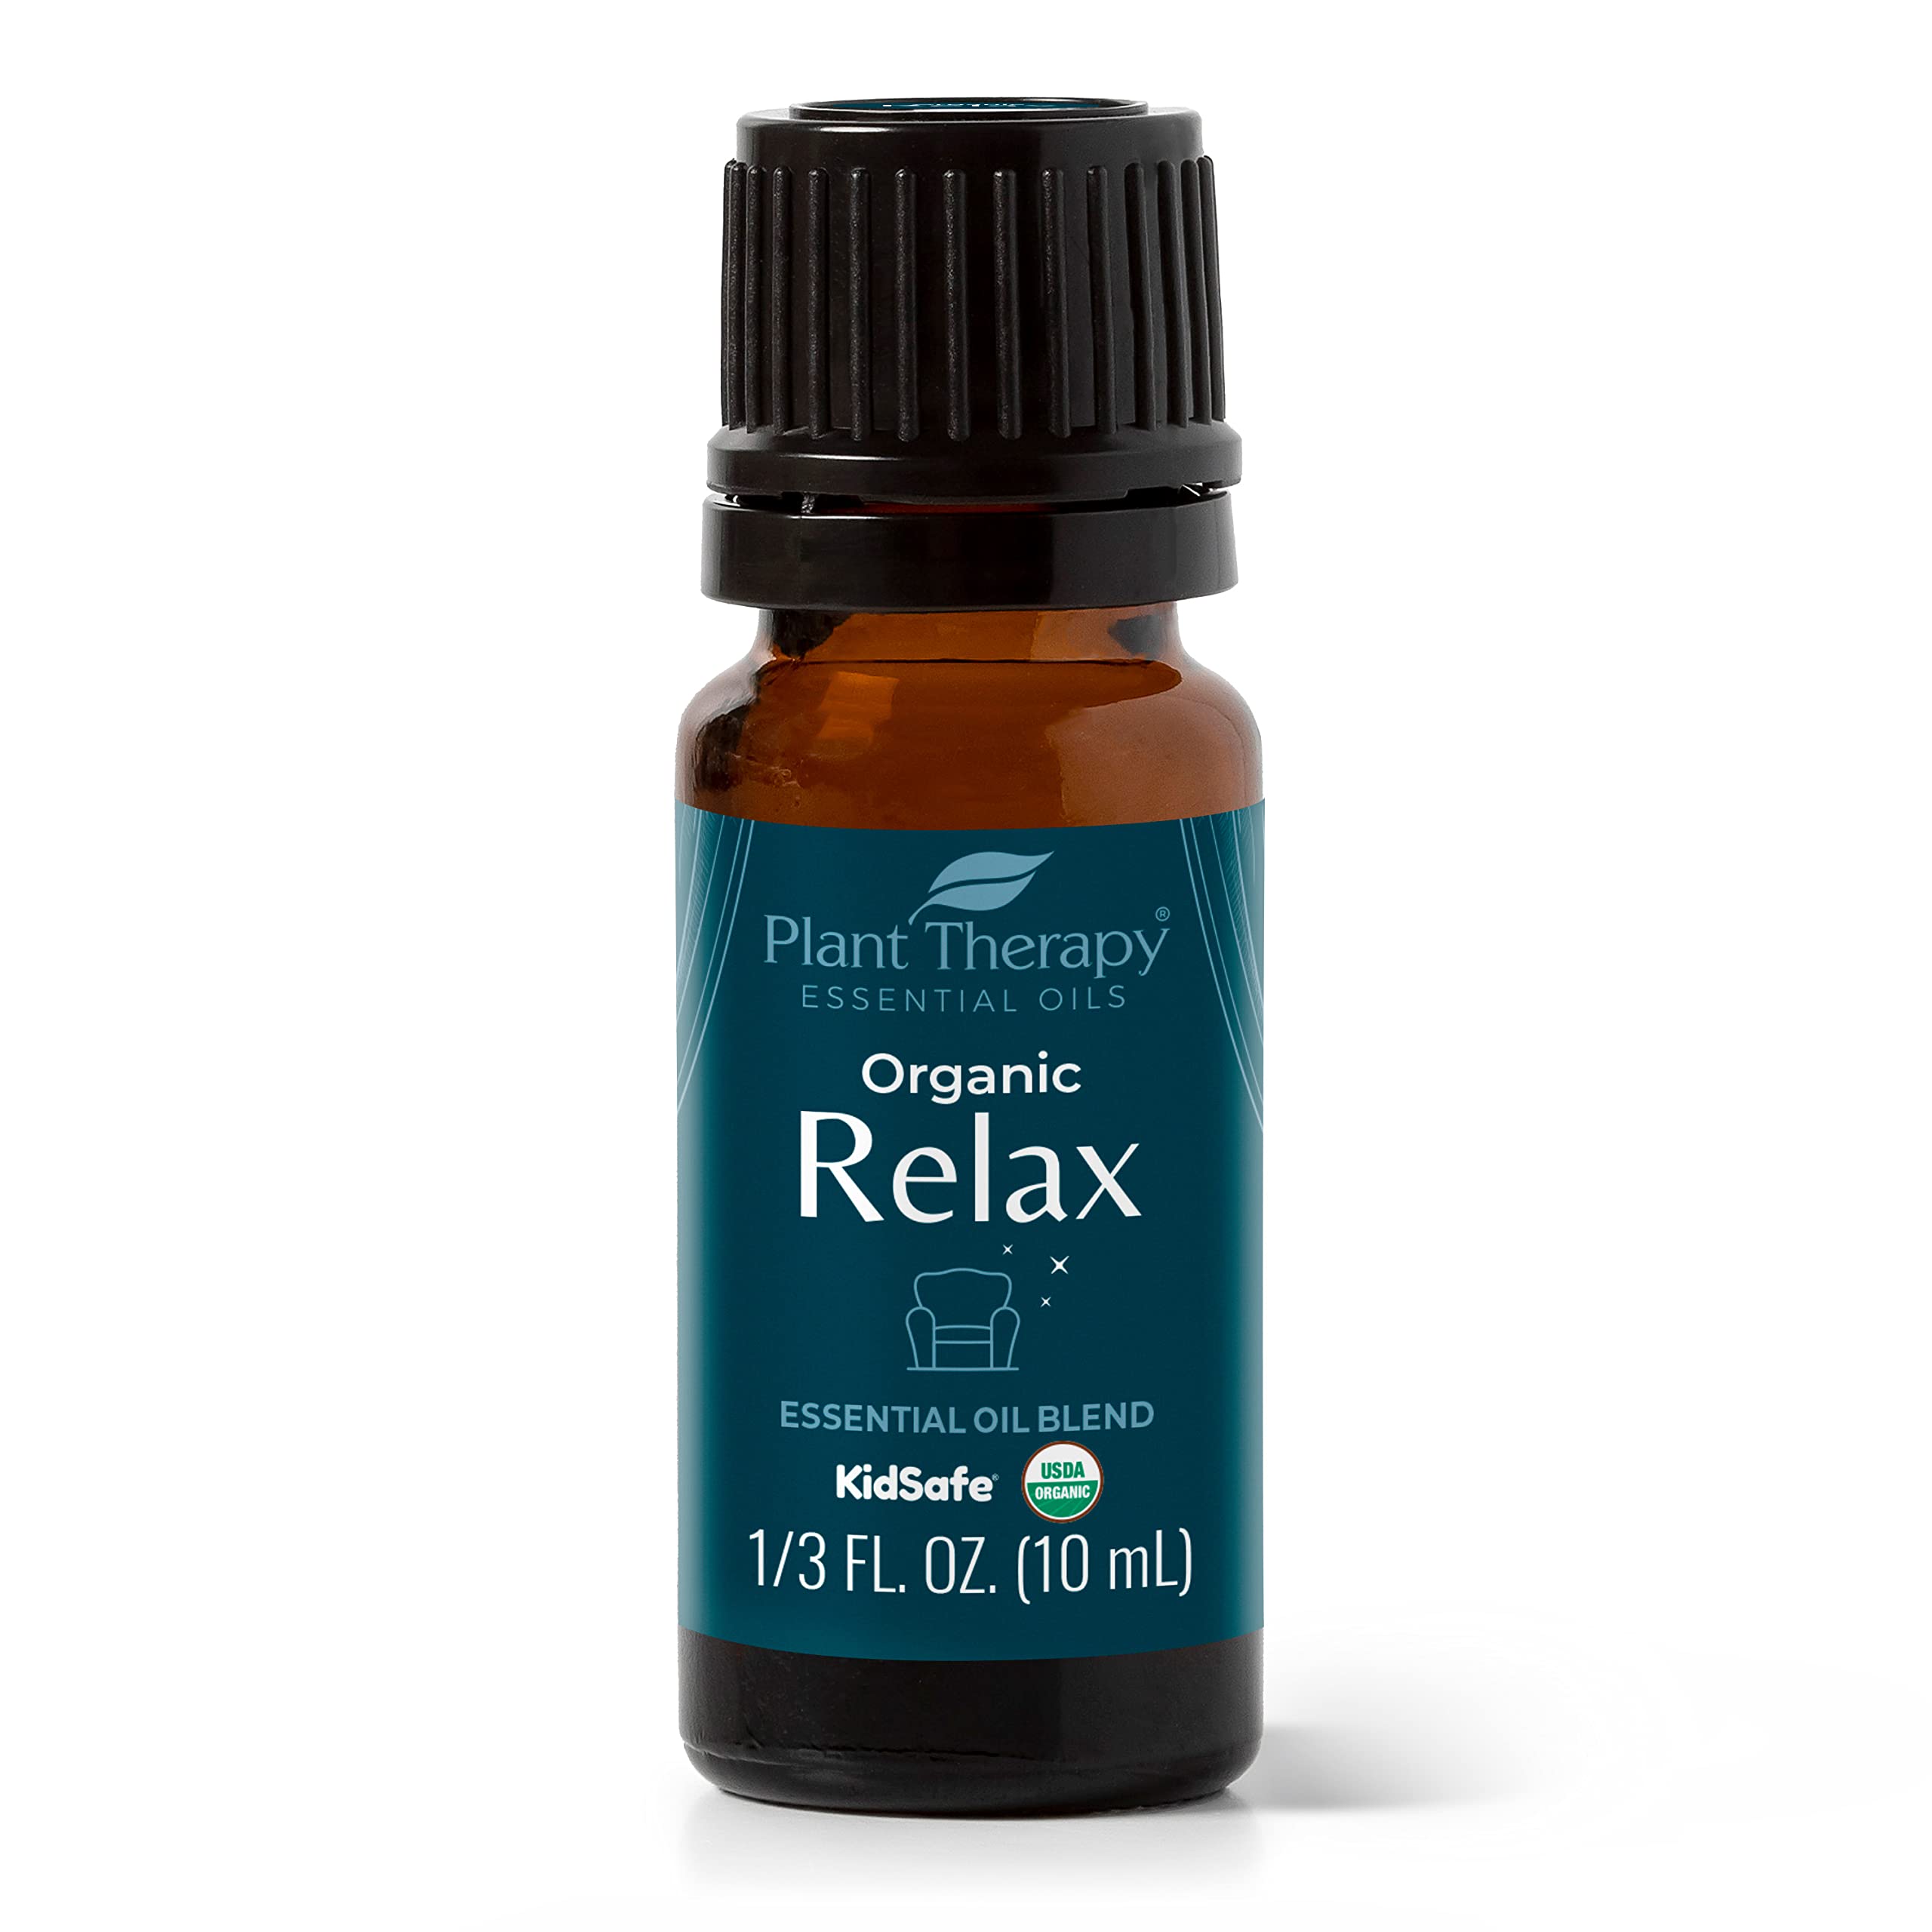 Plant Therapy Organic Relax Essential Oil Blend 100% Pure, Undiluted, Natural Aromatherapy, Therapeutic Grade 10 mL (1/3 oz)